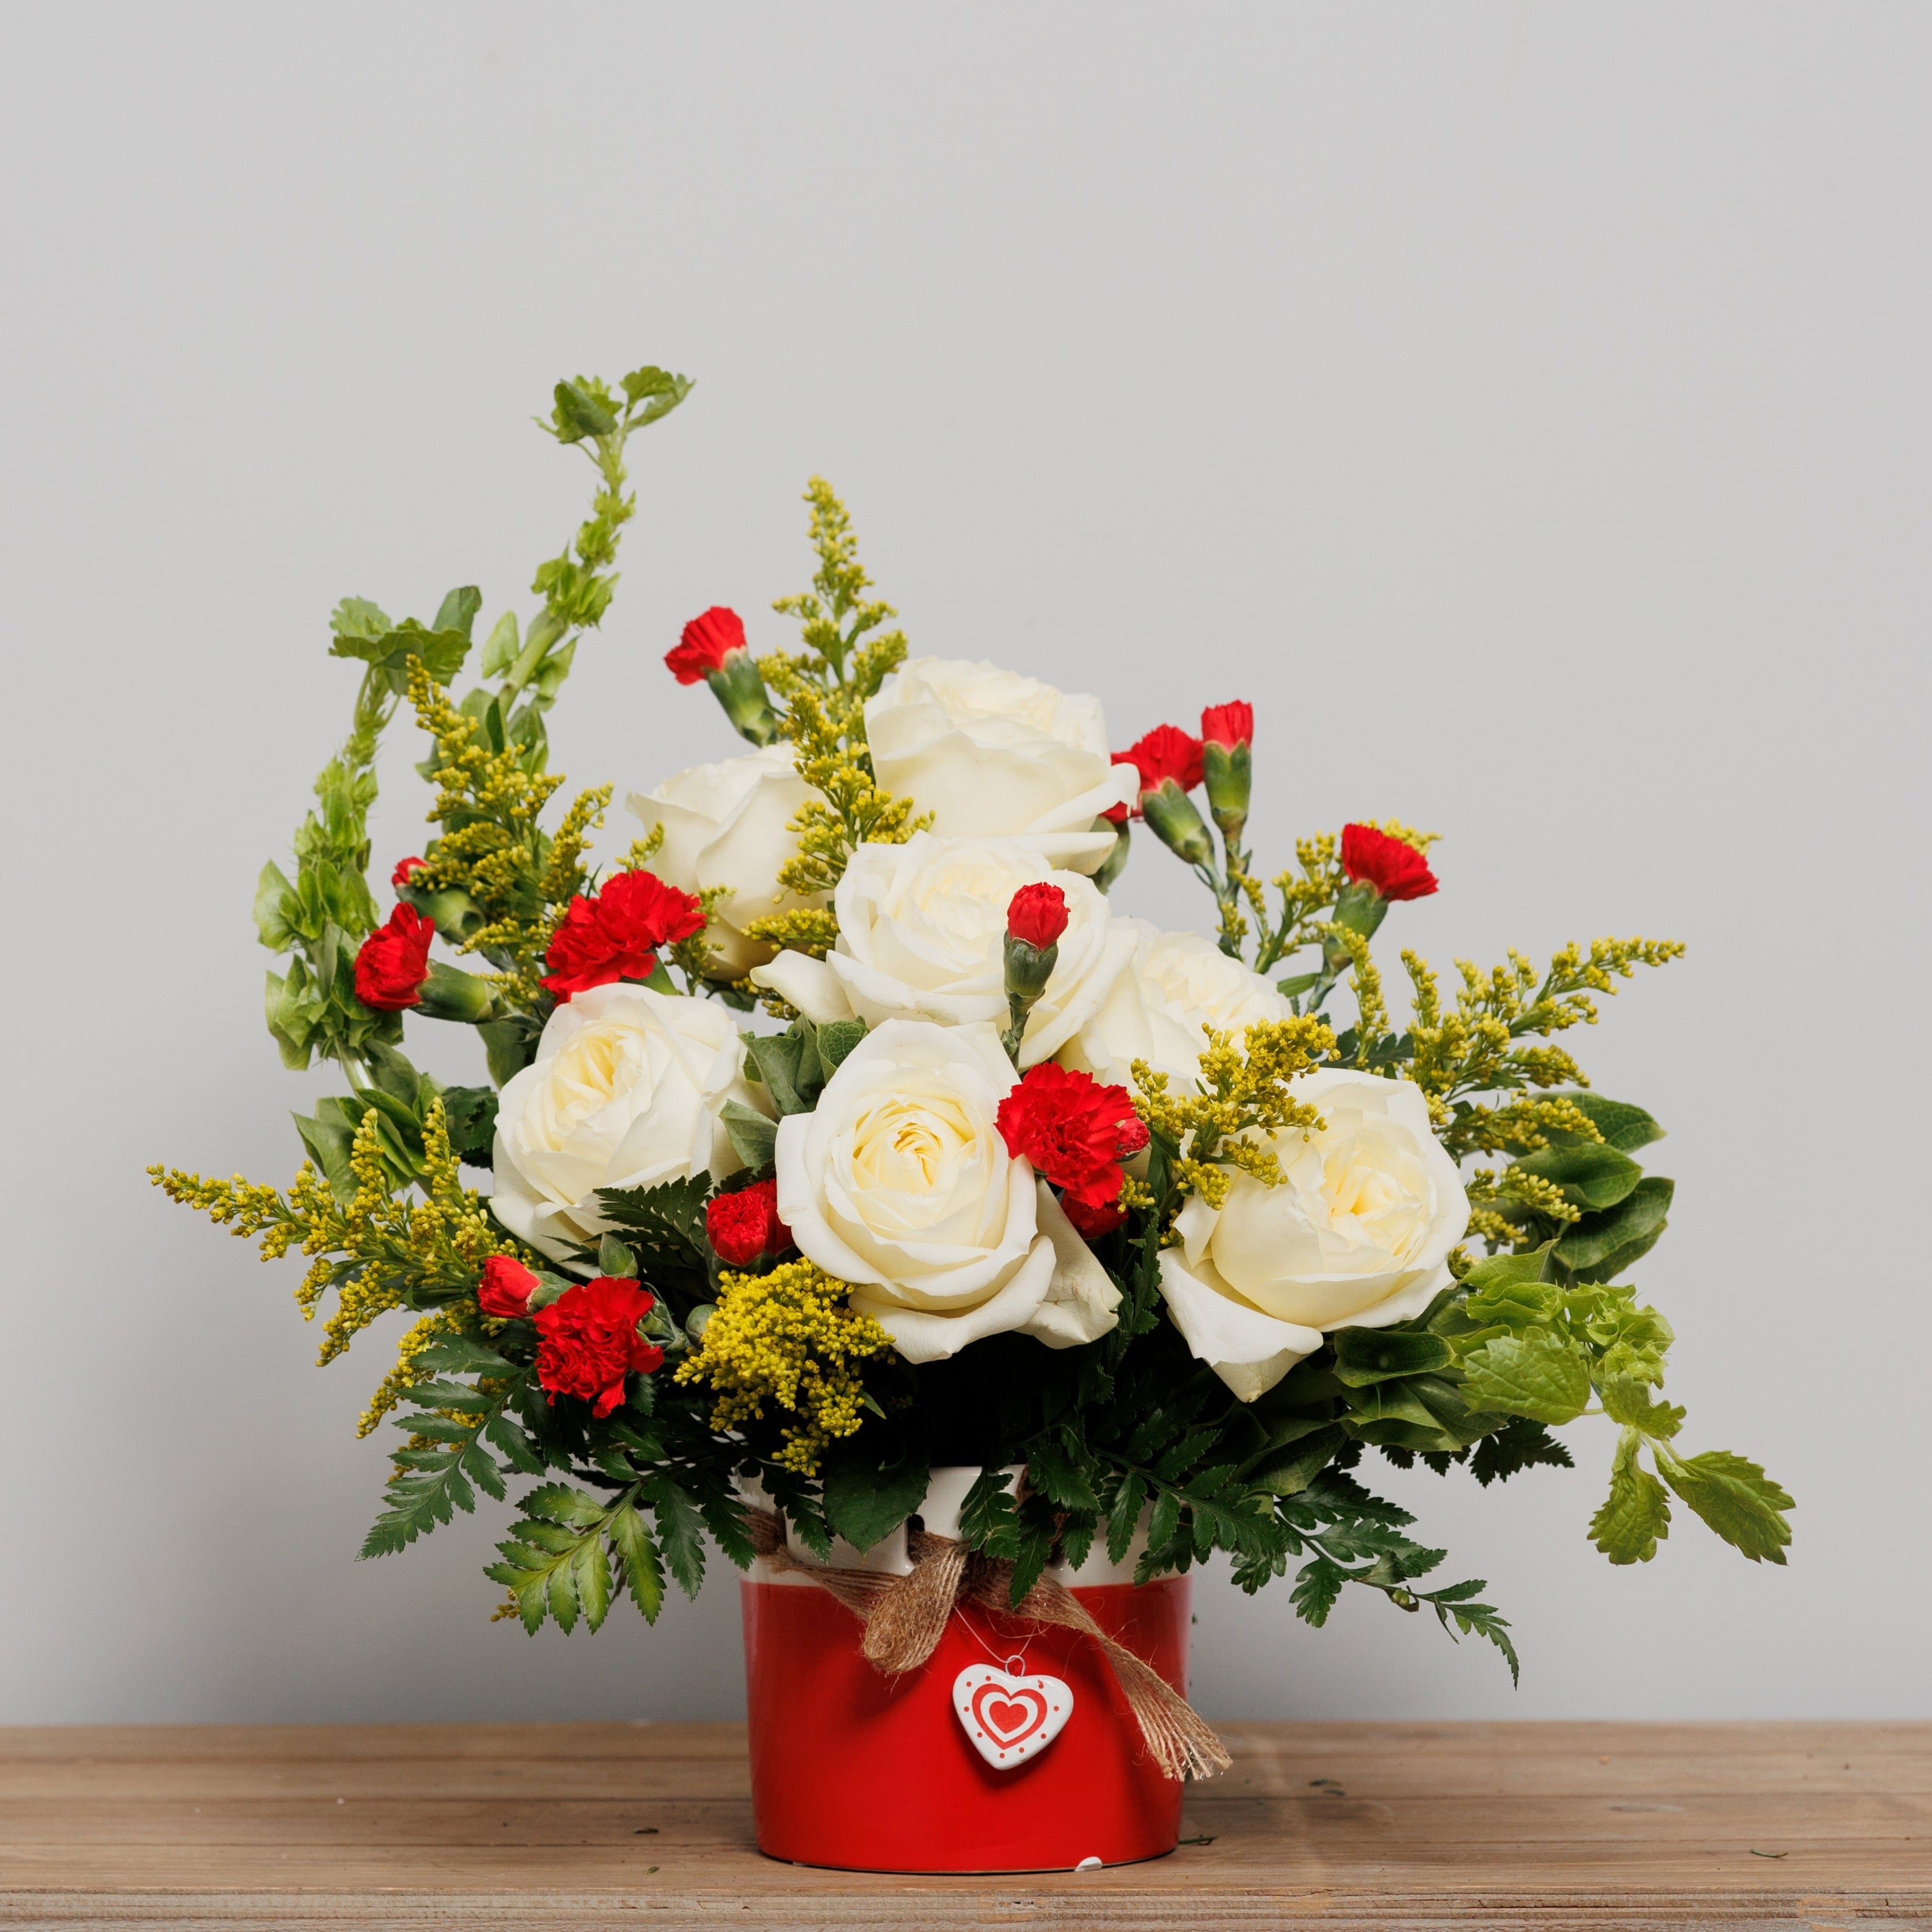 A flower arrangement with white roses and bells of Ireland in a keepsake heart cylinder.